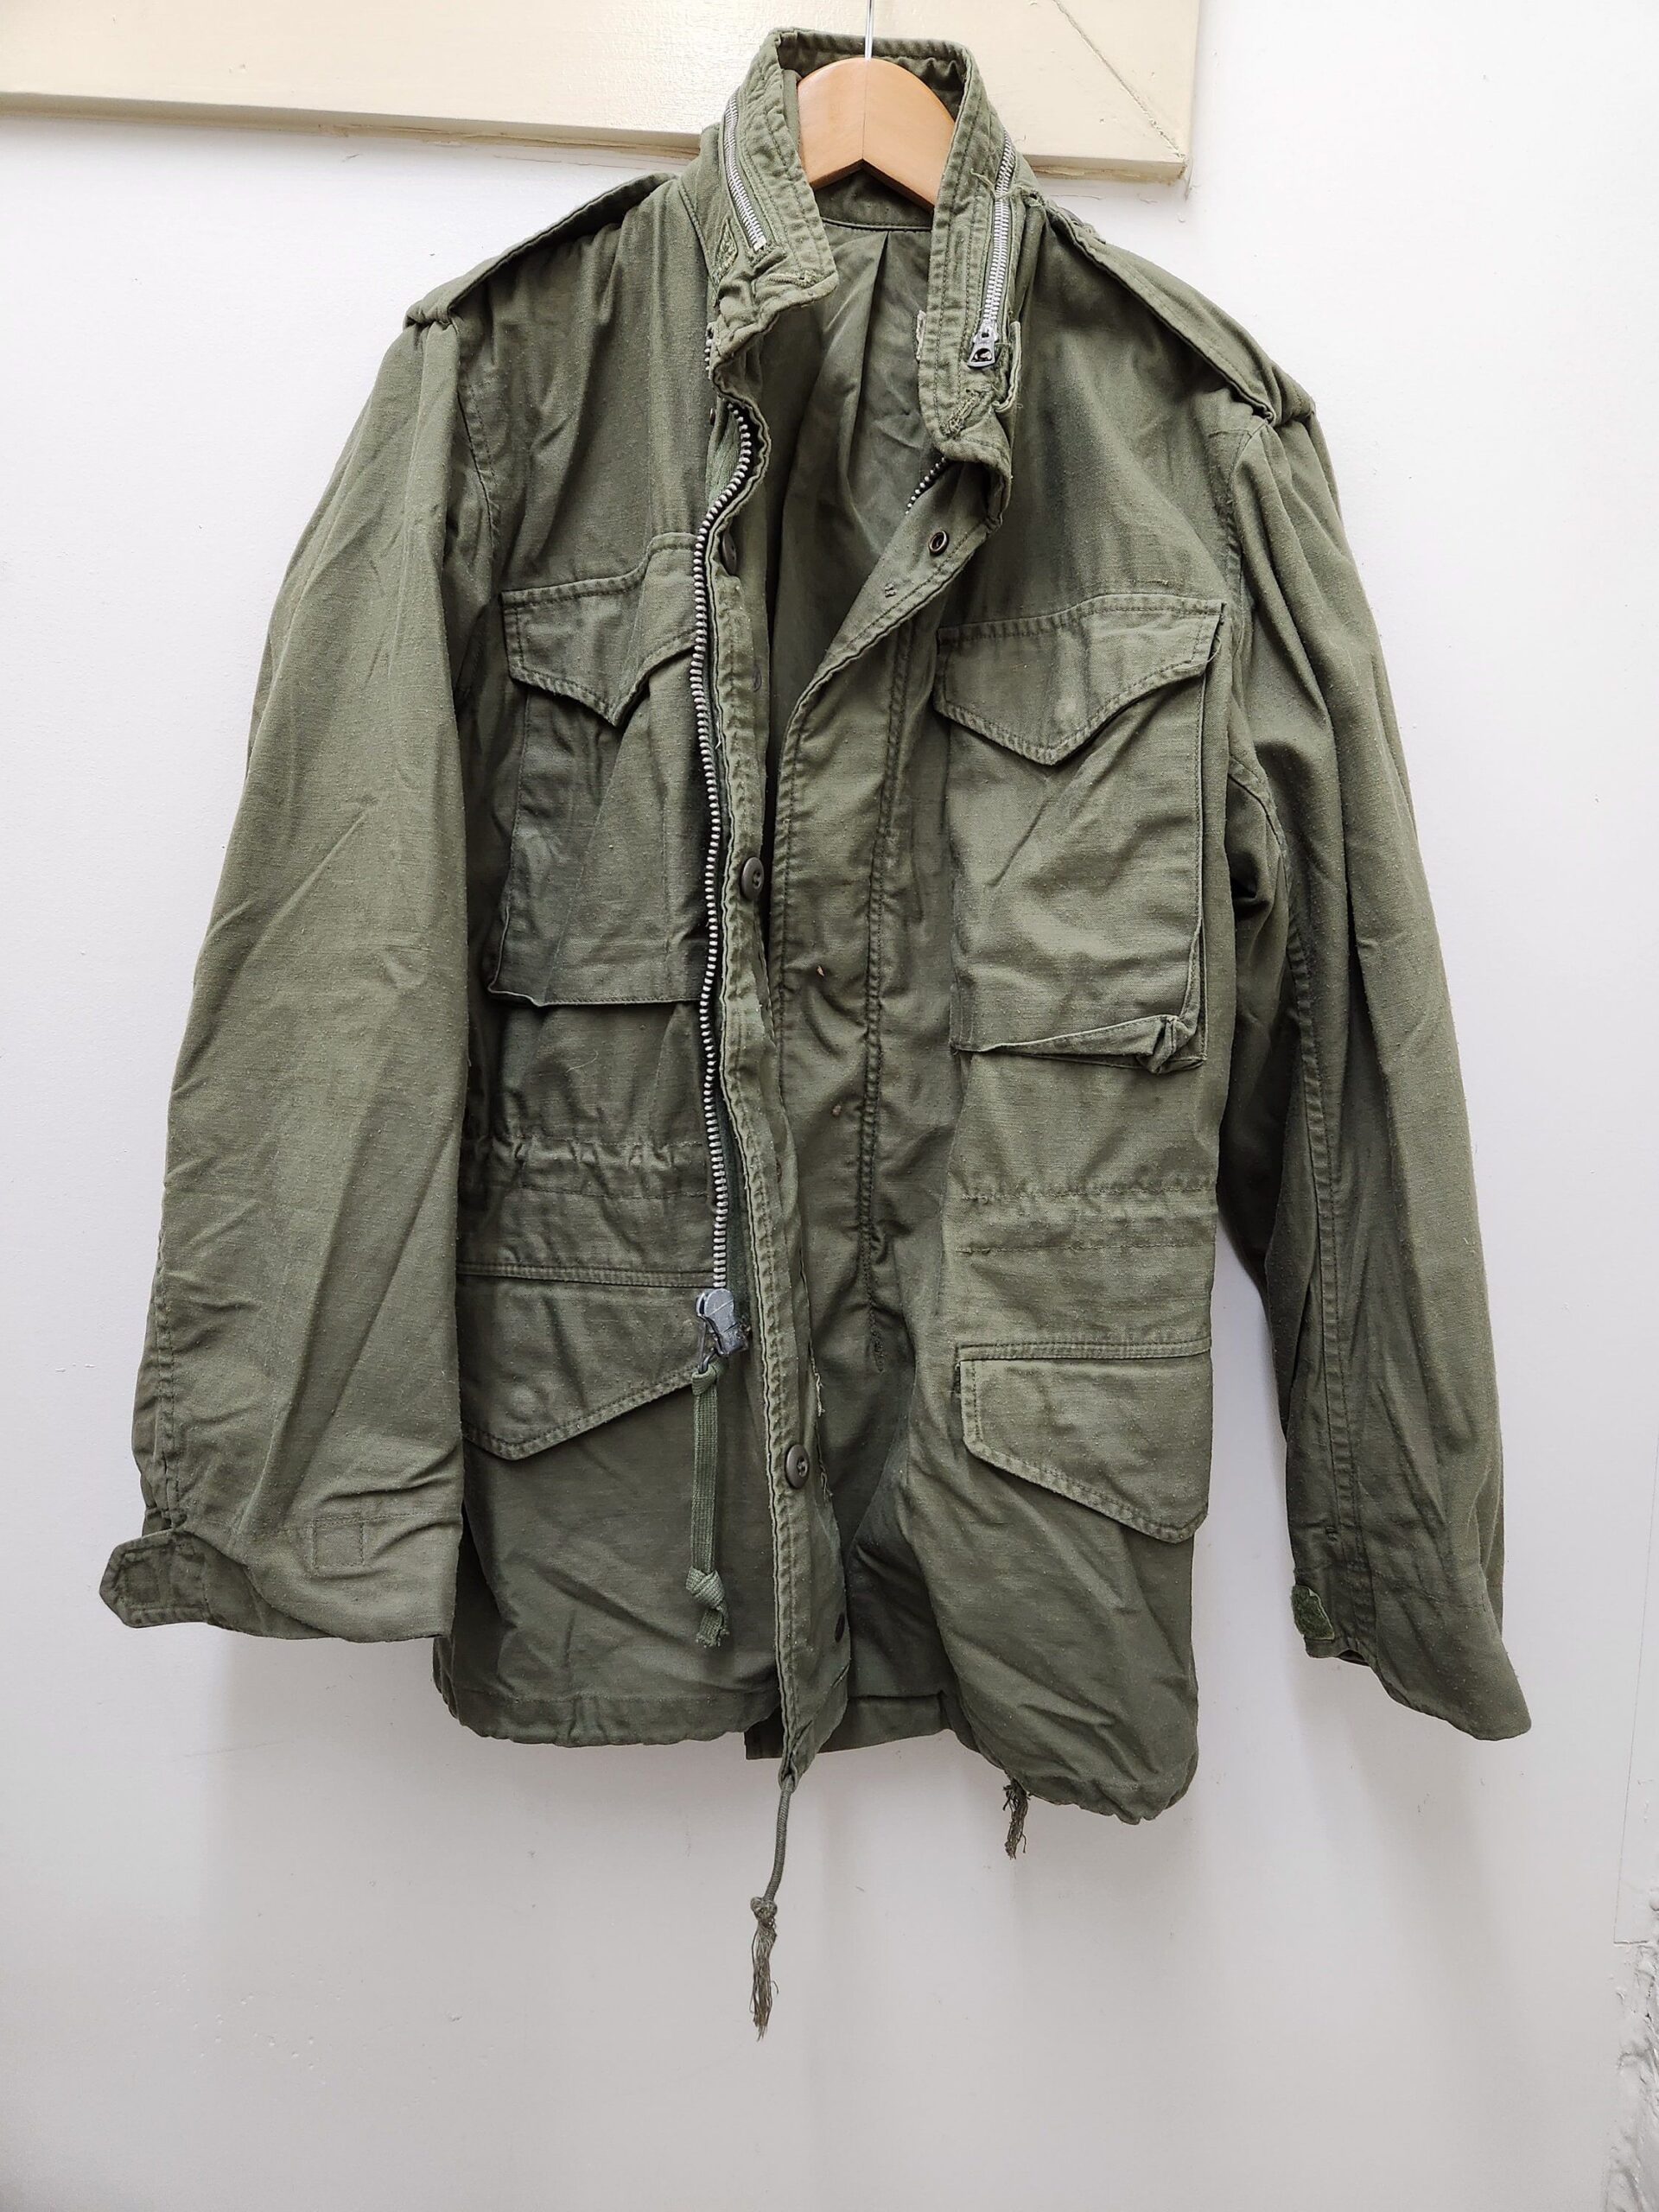 Finding
Your Field Jacket With Specific Features